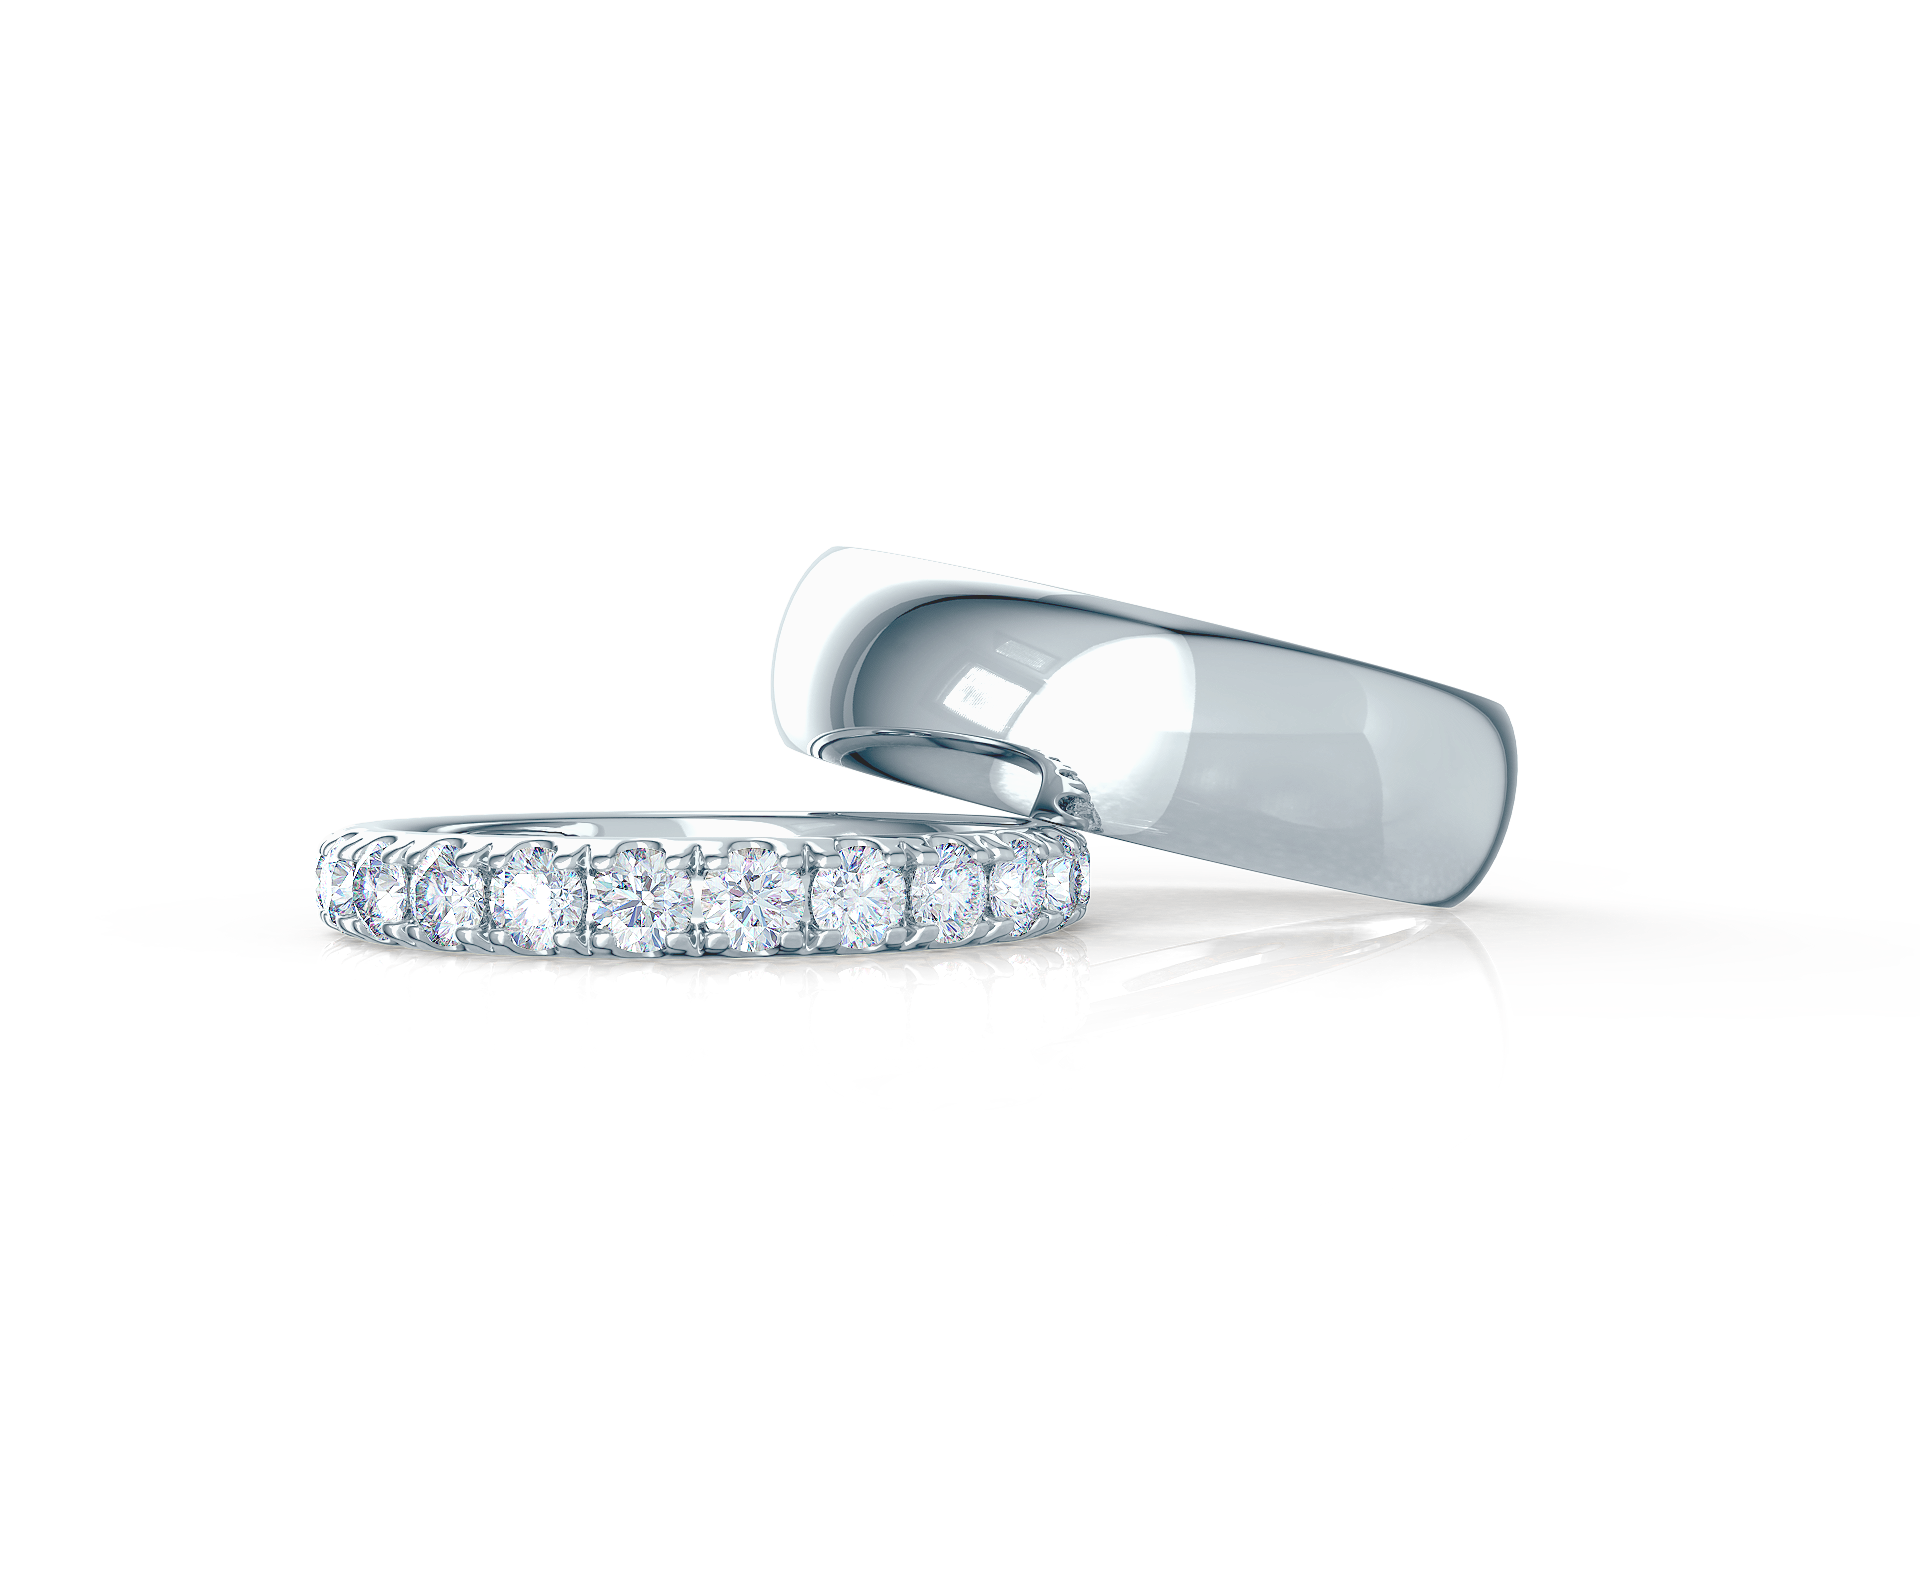  Pair your U Pavé Three Quarter Band with a Classic Rounded Ring    Shop Now   